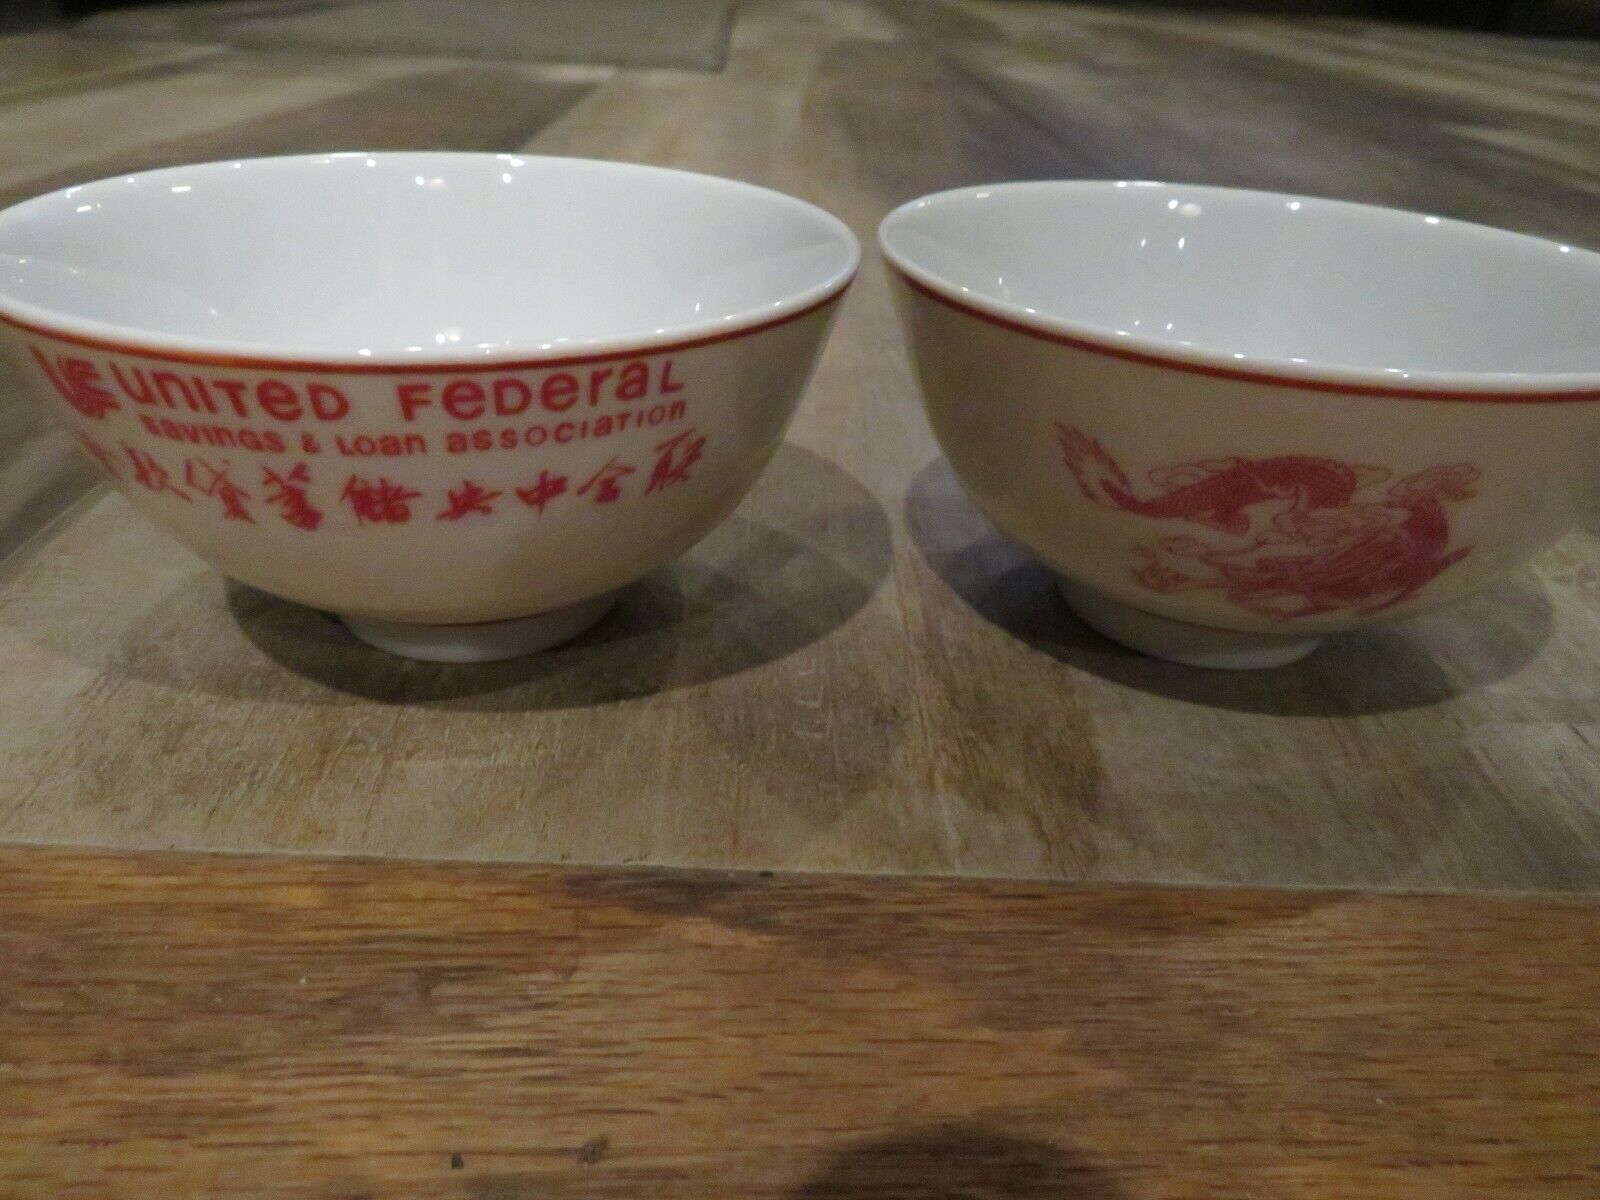 VTG Collectible Chinese Rice Bowls (2) United Federal Savings & Loan Assoc Bank  United Federal Savings & Loan Association Bank